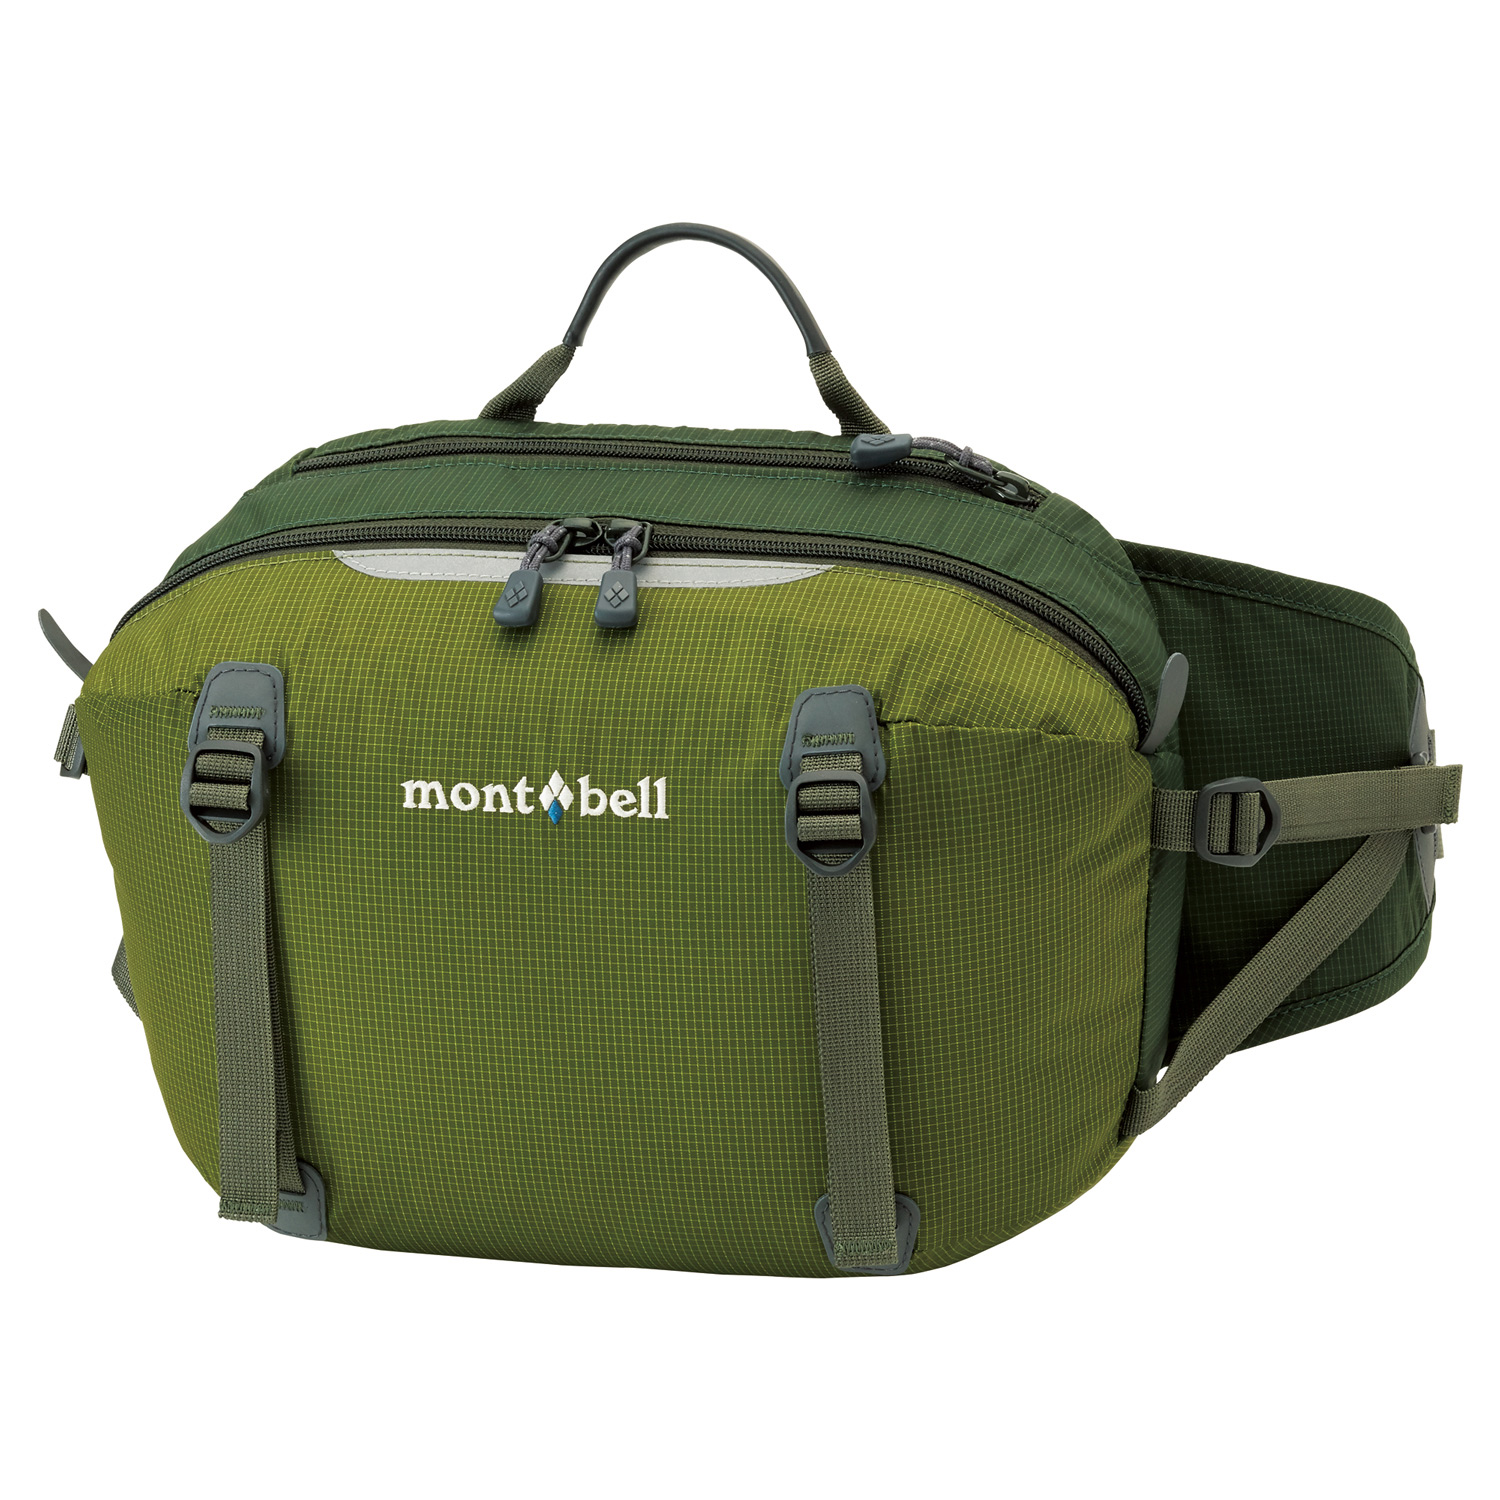 Trail Lumbar Pack 7 | Montbell Euro